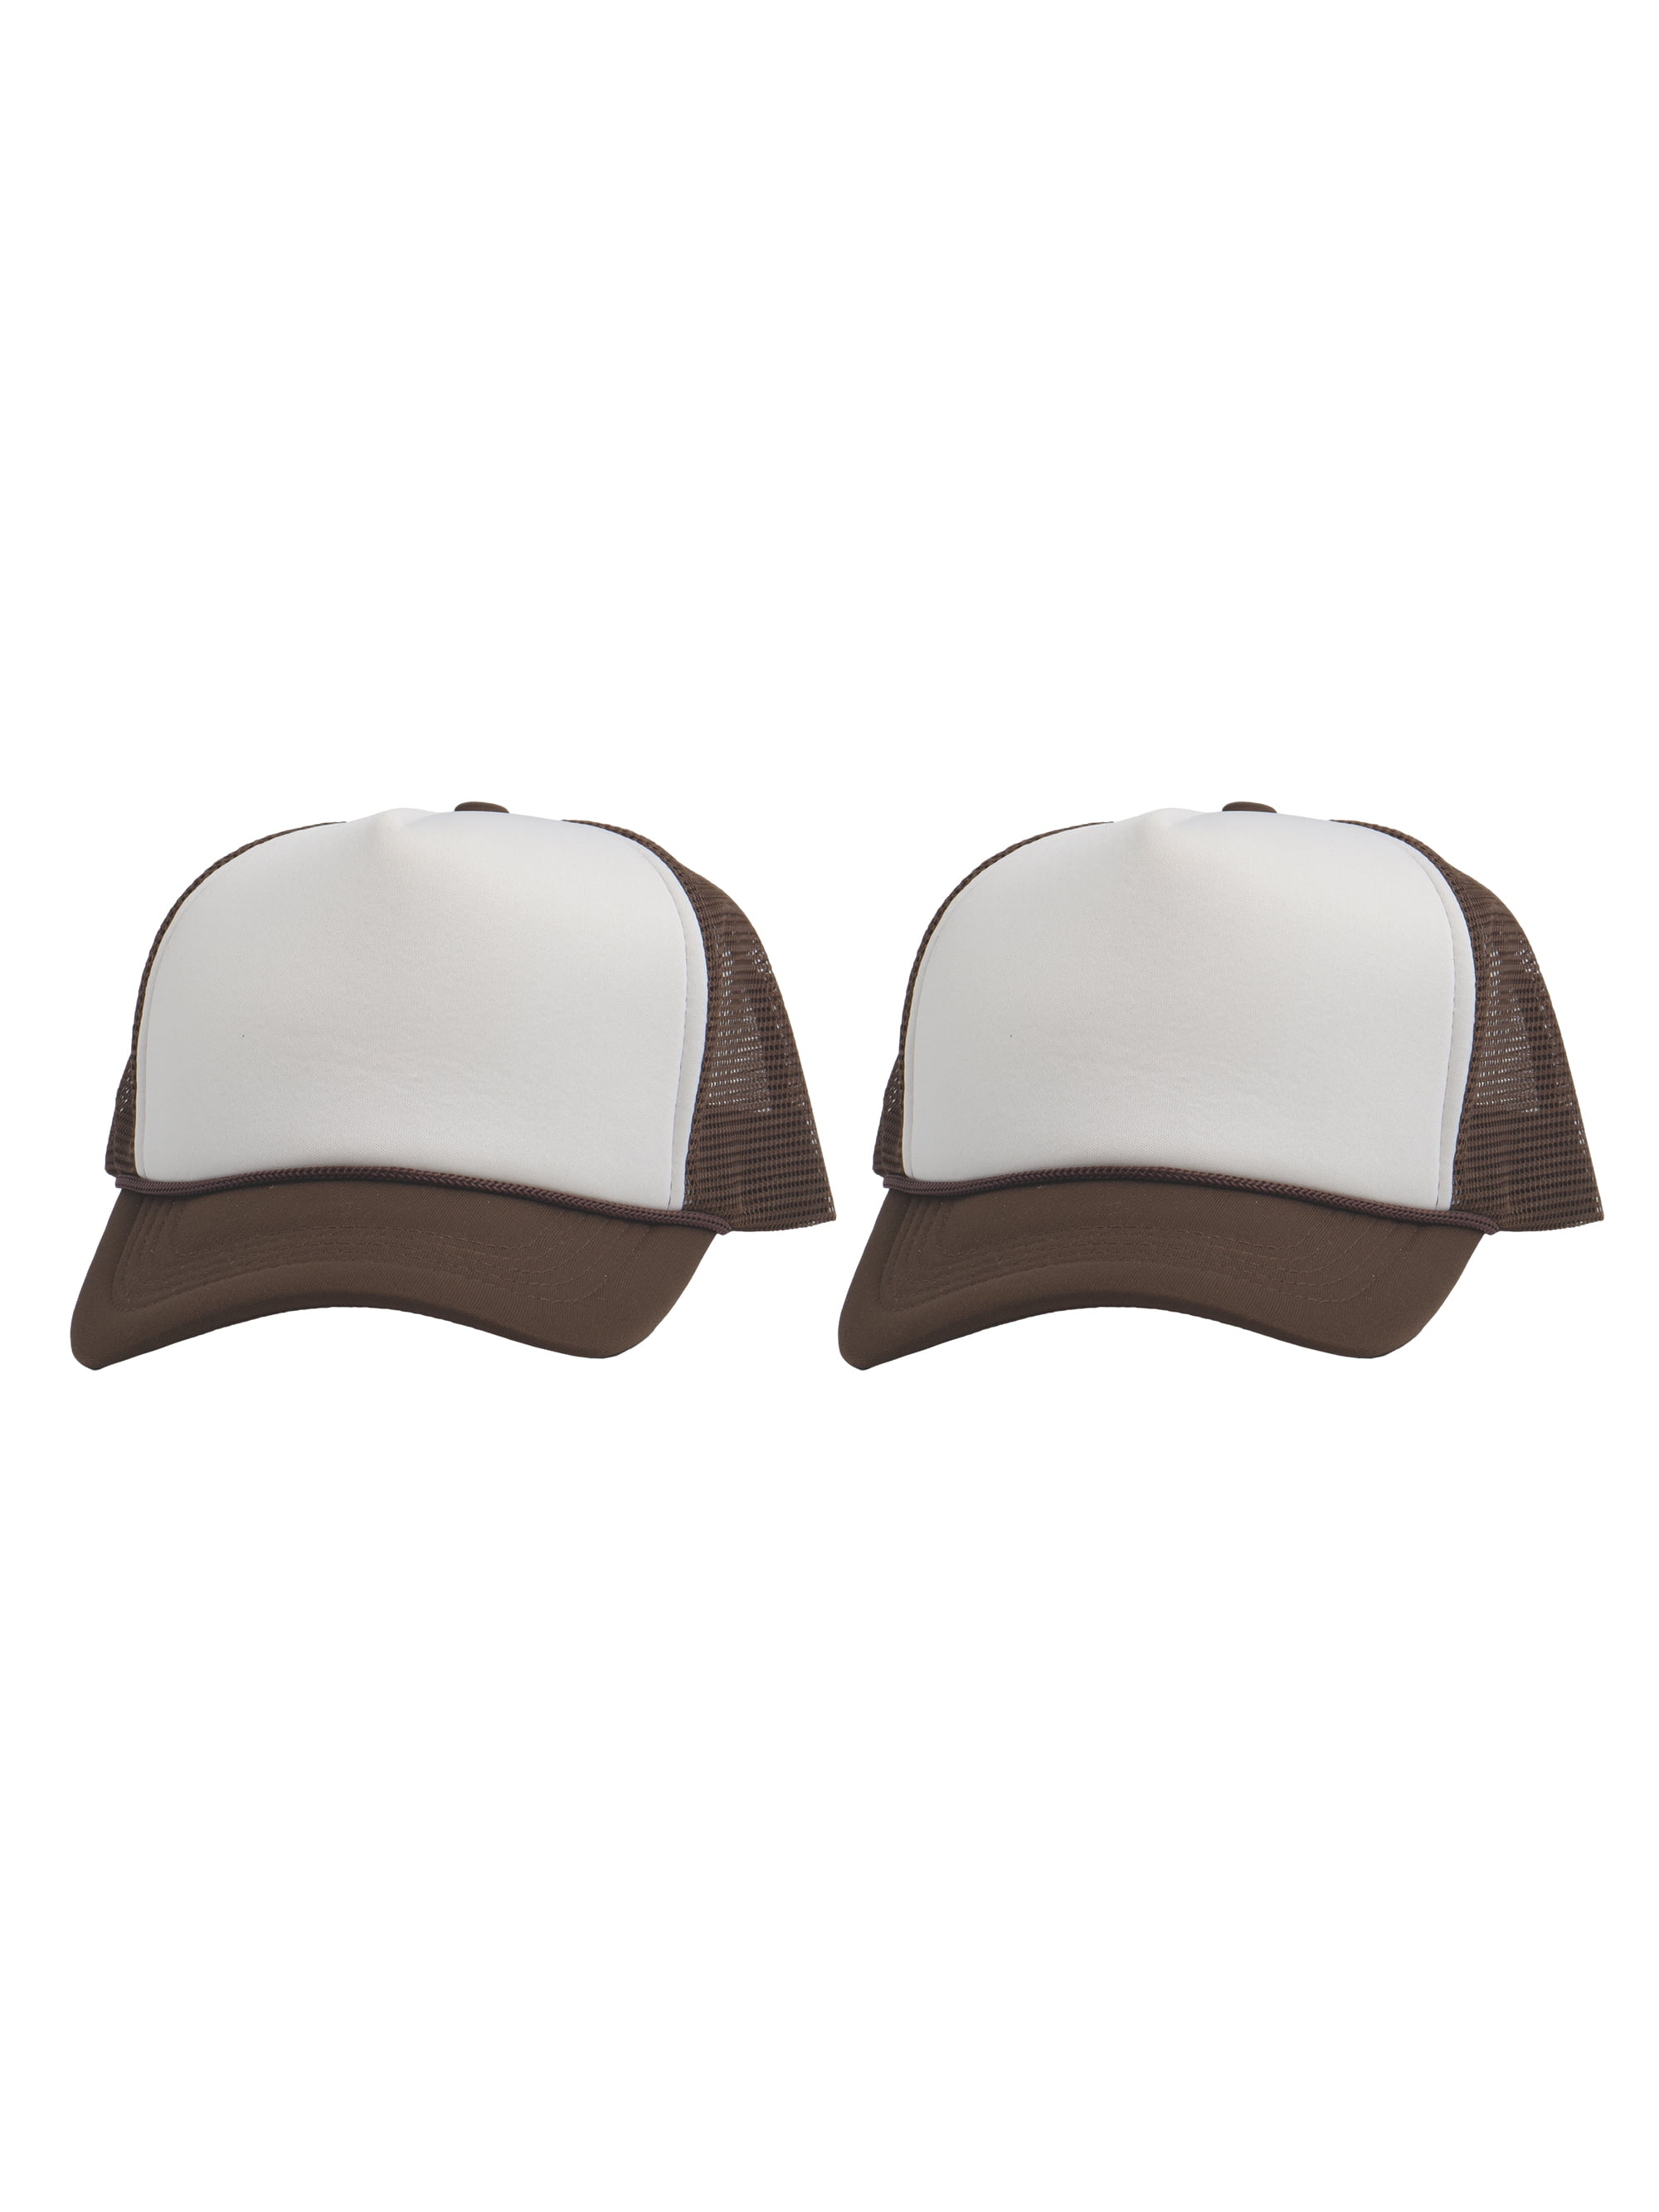 Two-Tone Blank Contrast Mesh Trucker Hats Brown/Creme